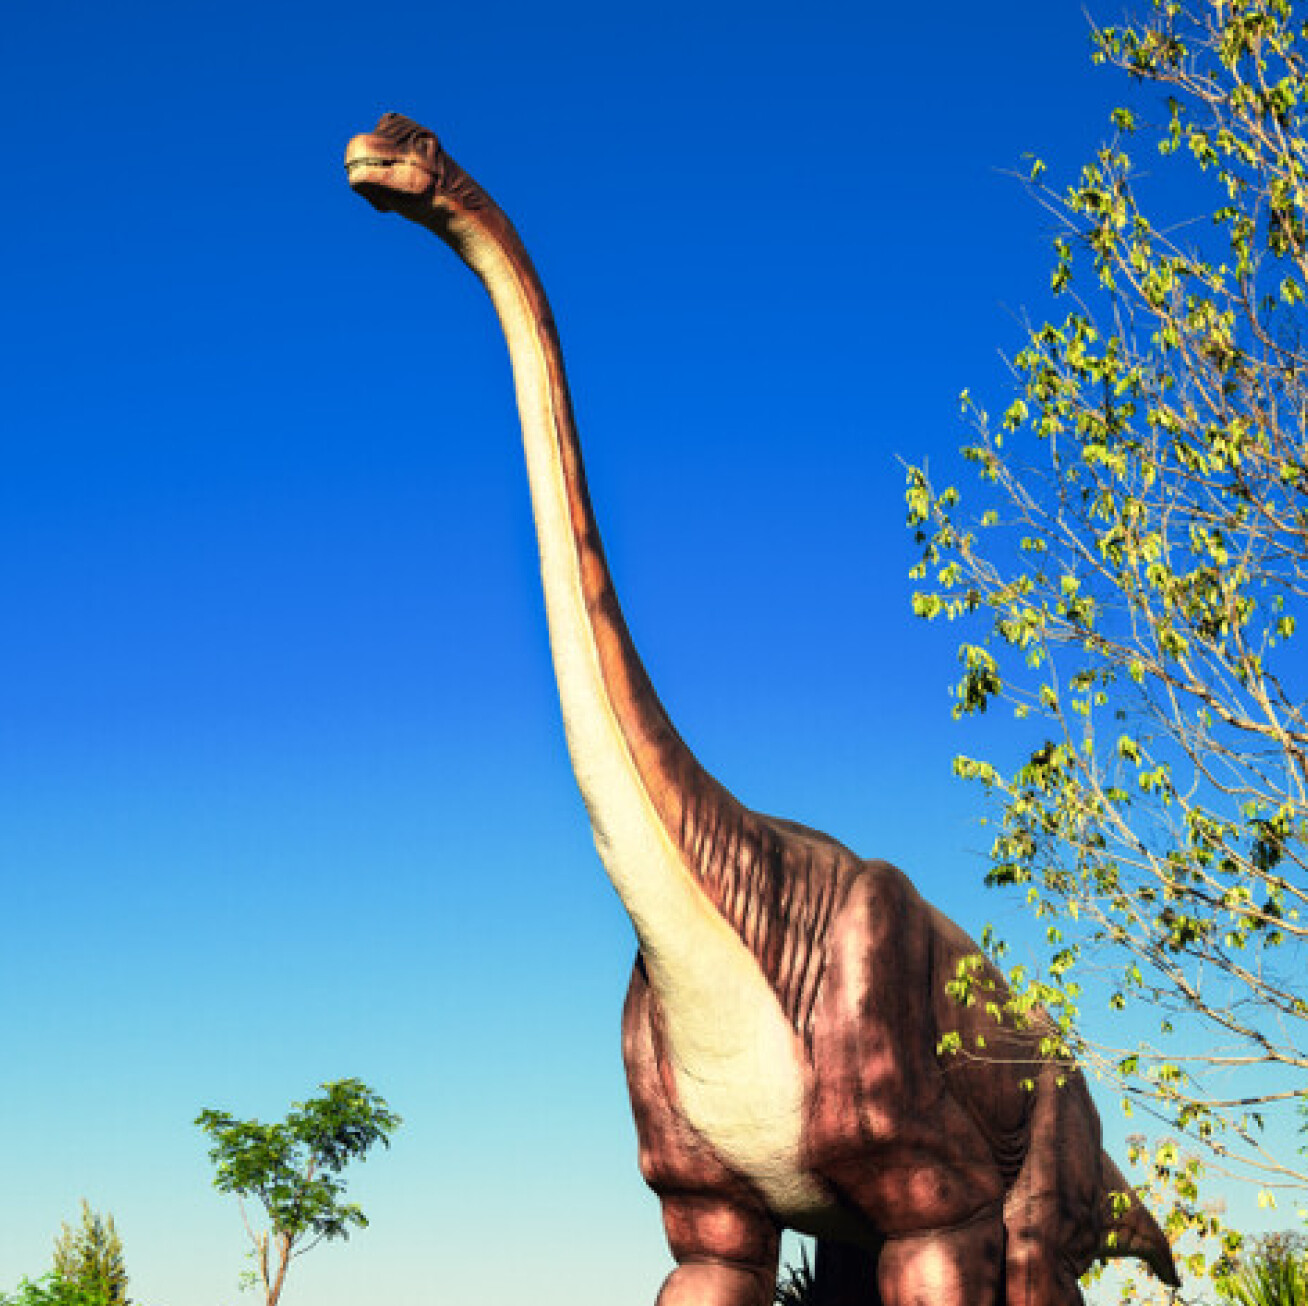 Photo of a model of a Patagotitan dinosaur. It towers over the trees.